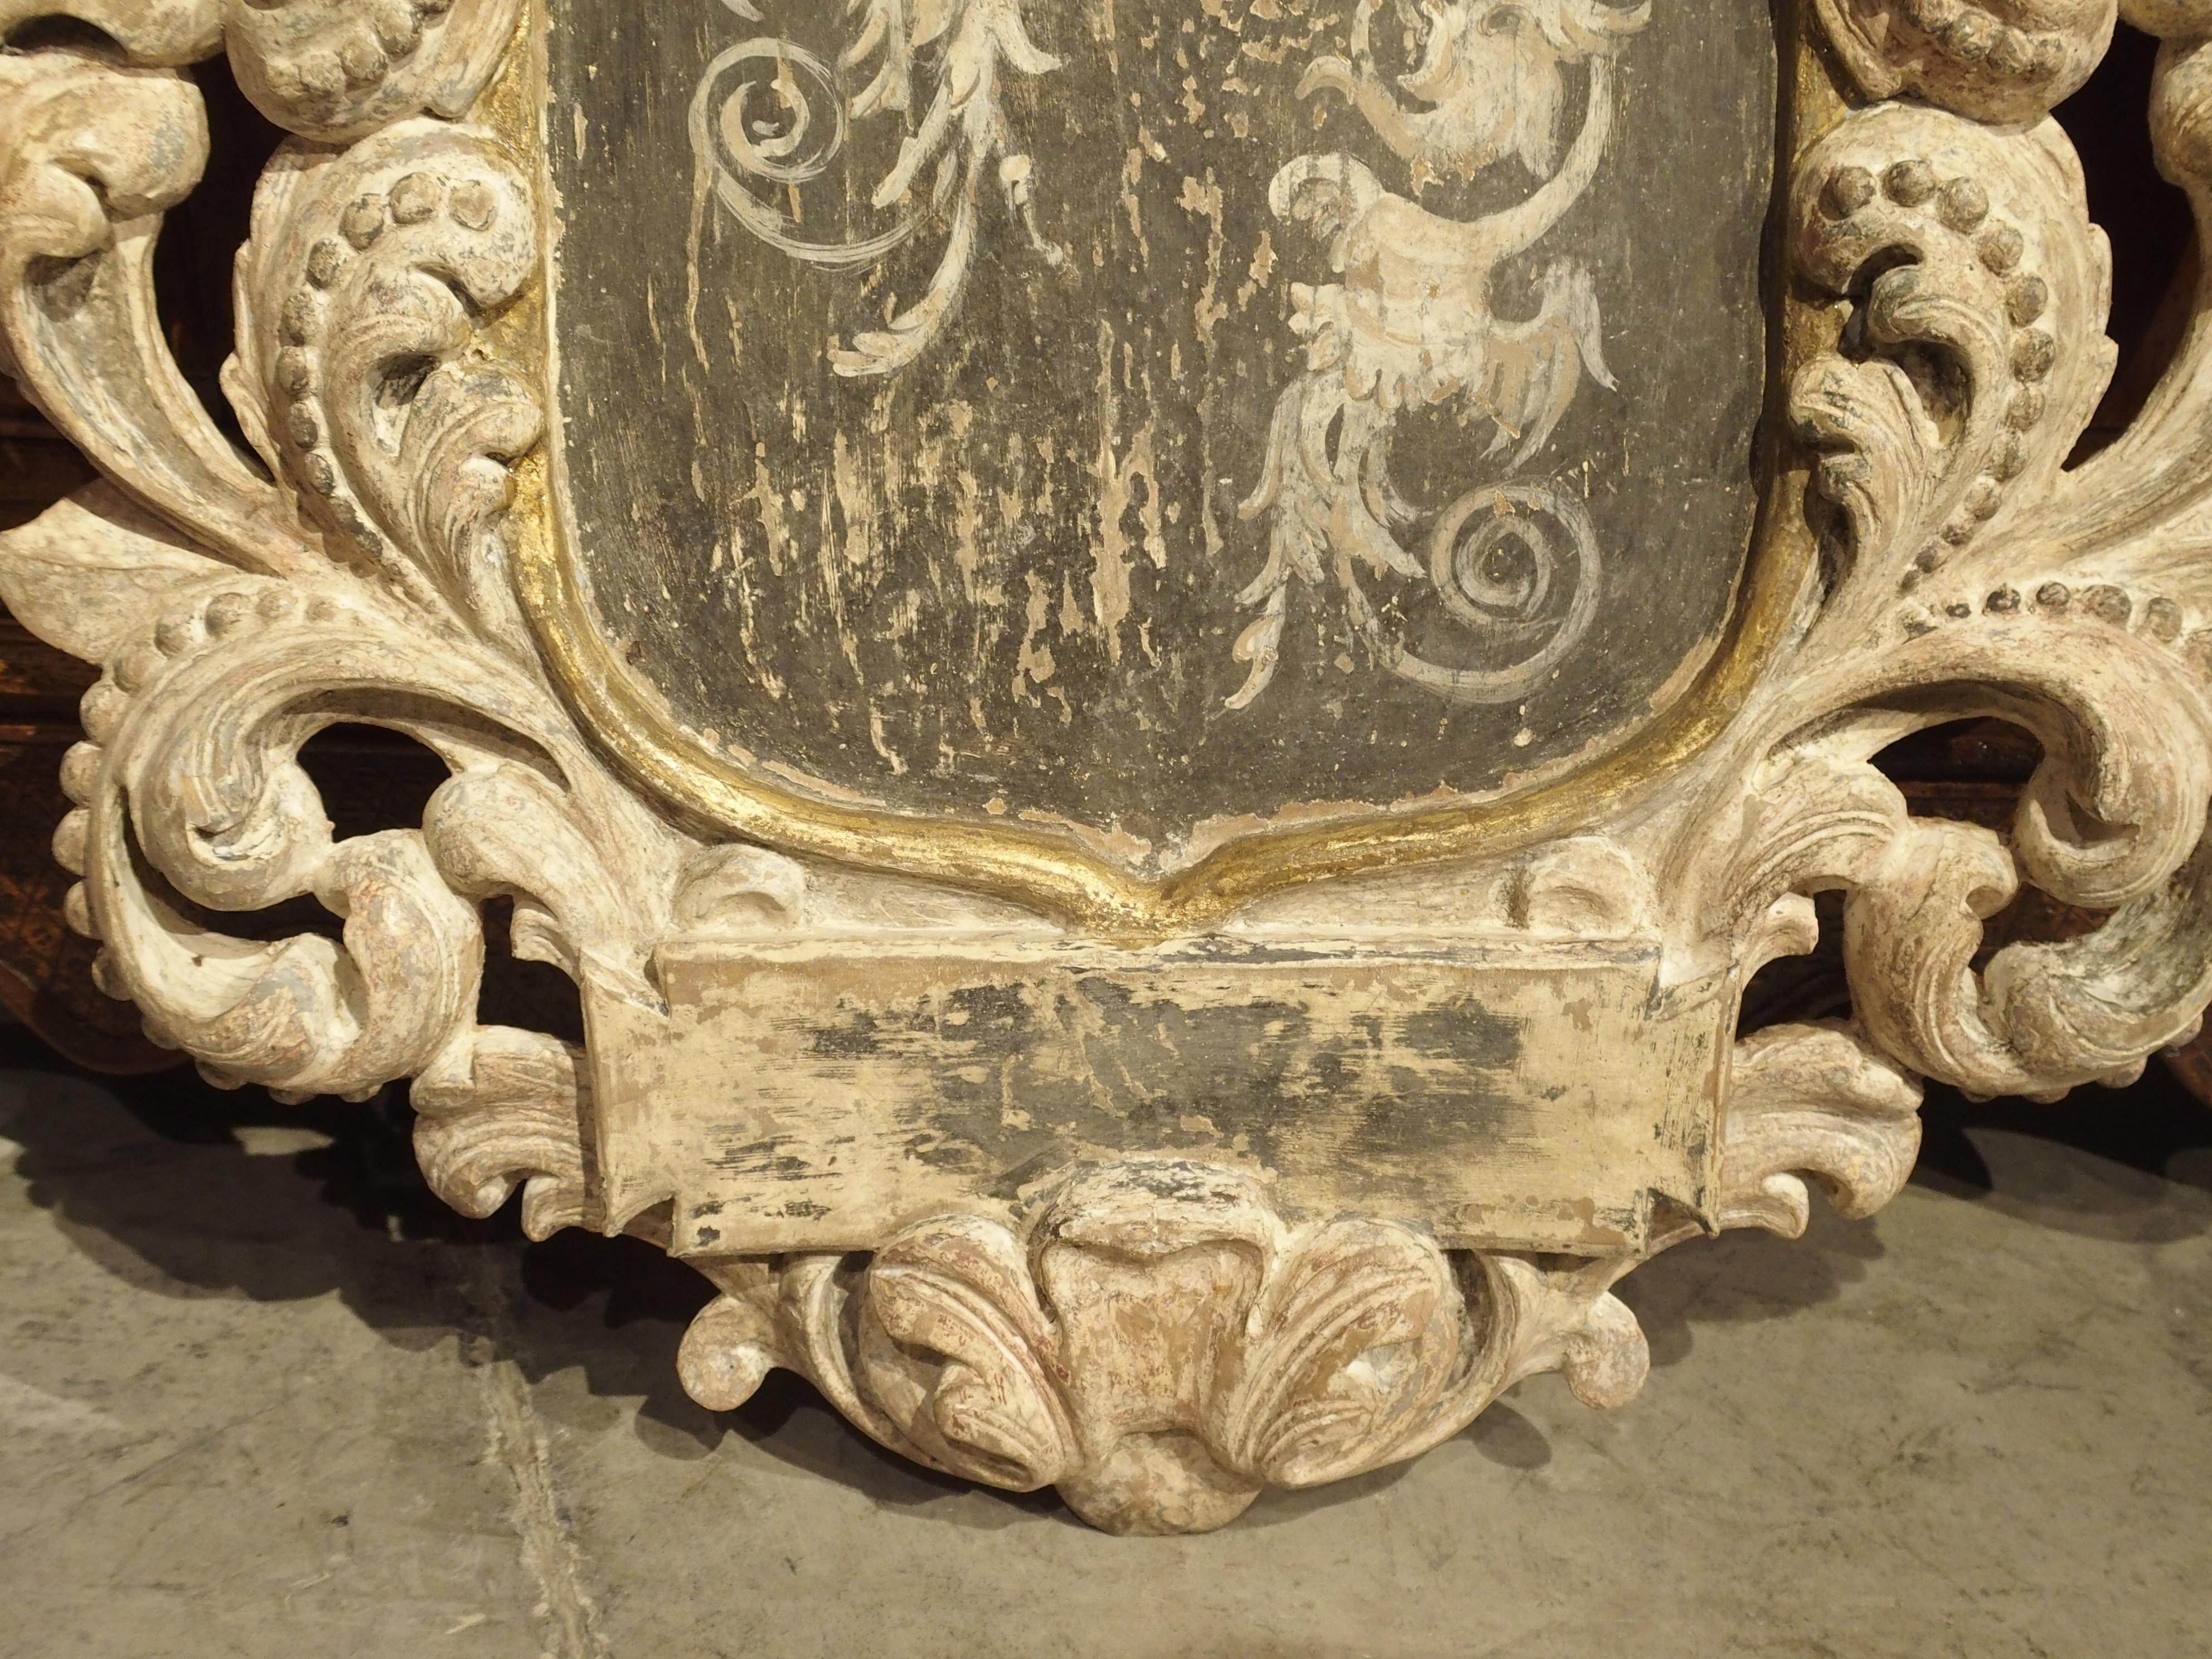 This wonderful hand carved and parcel paint plaque in the shape of a stylized cartouche is from Italy. The crown at the top is resting upon a shield form with painted demi figures of winged dragons. Surrounding the entire shield are thick scrolling,